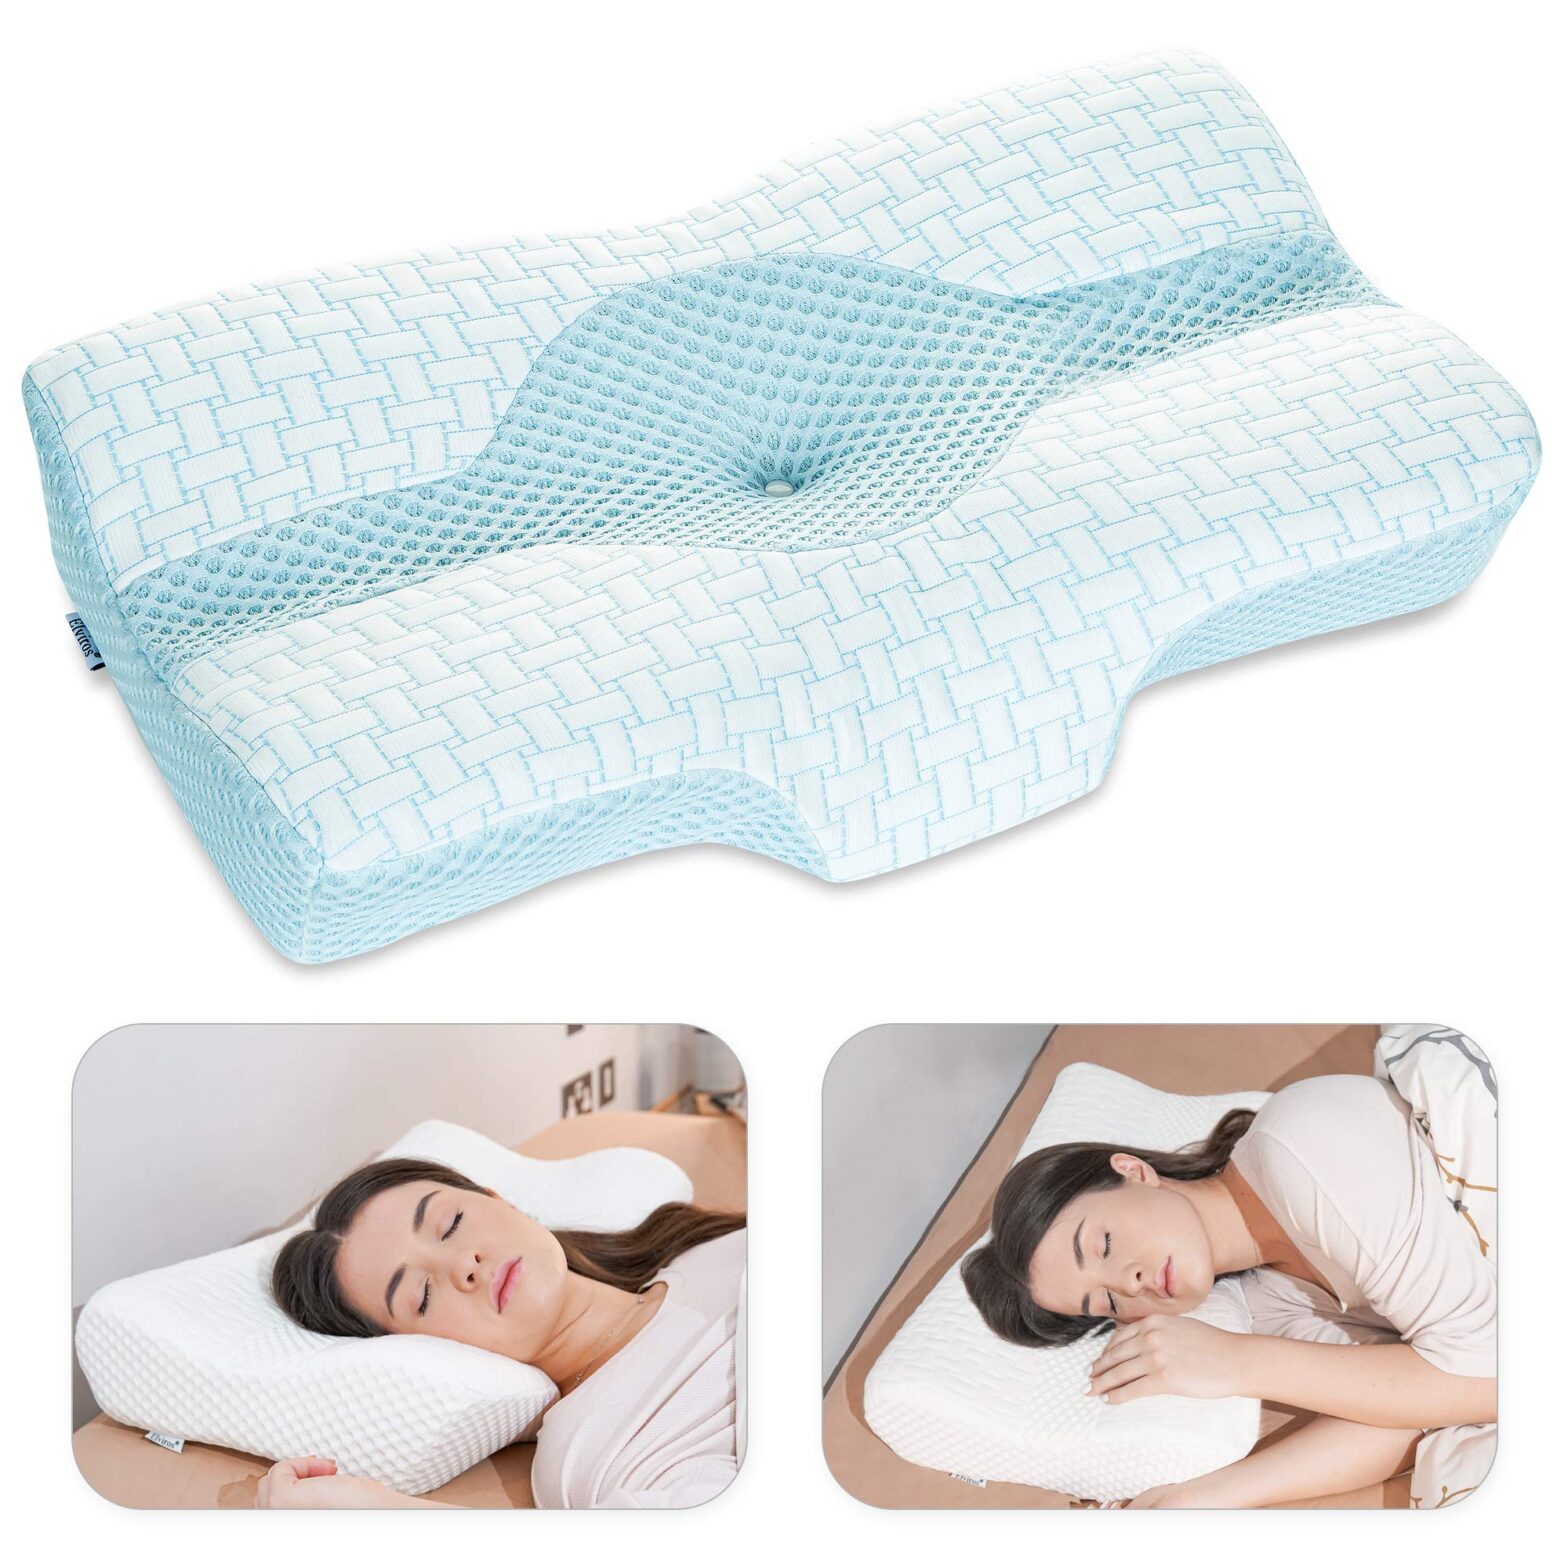 Cervical Pillows Industry